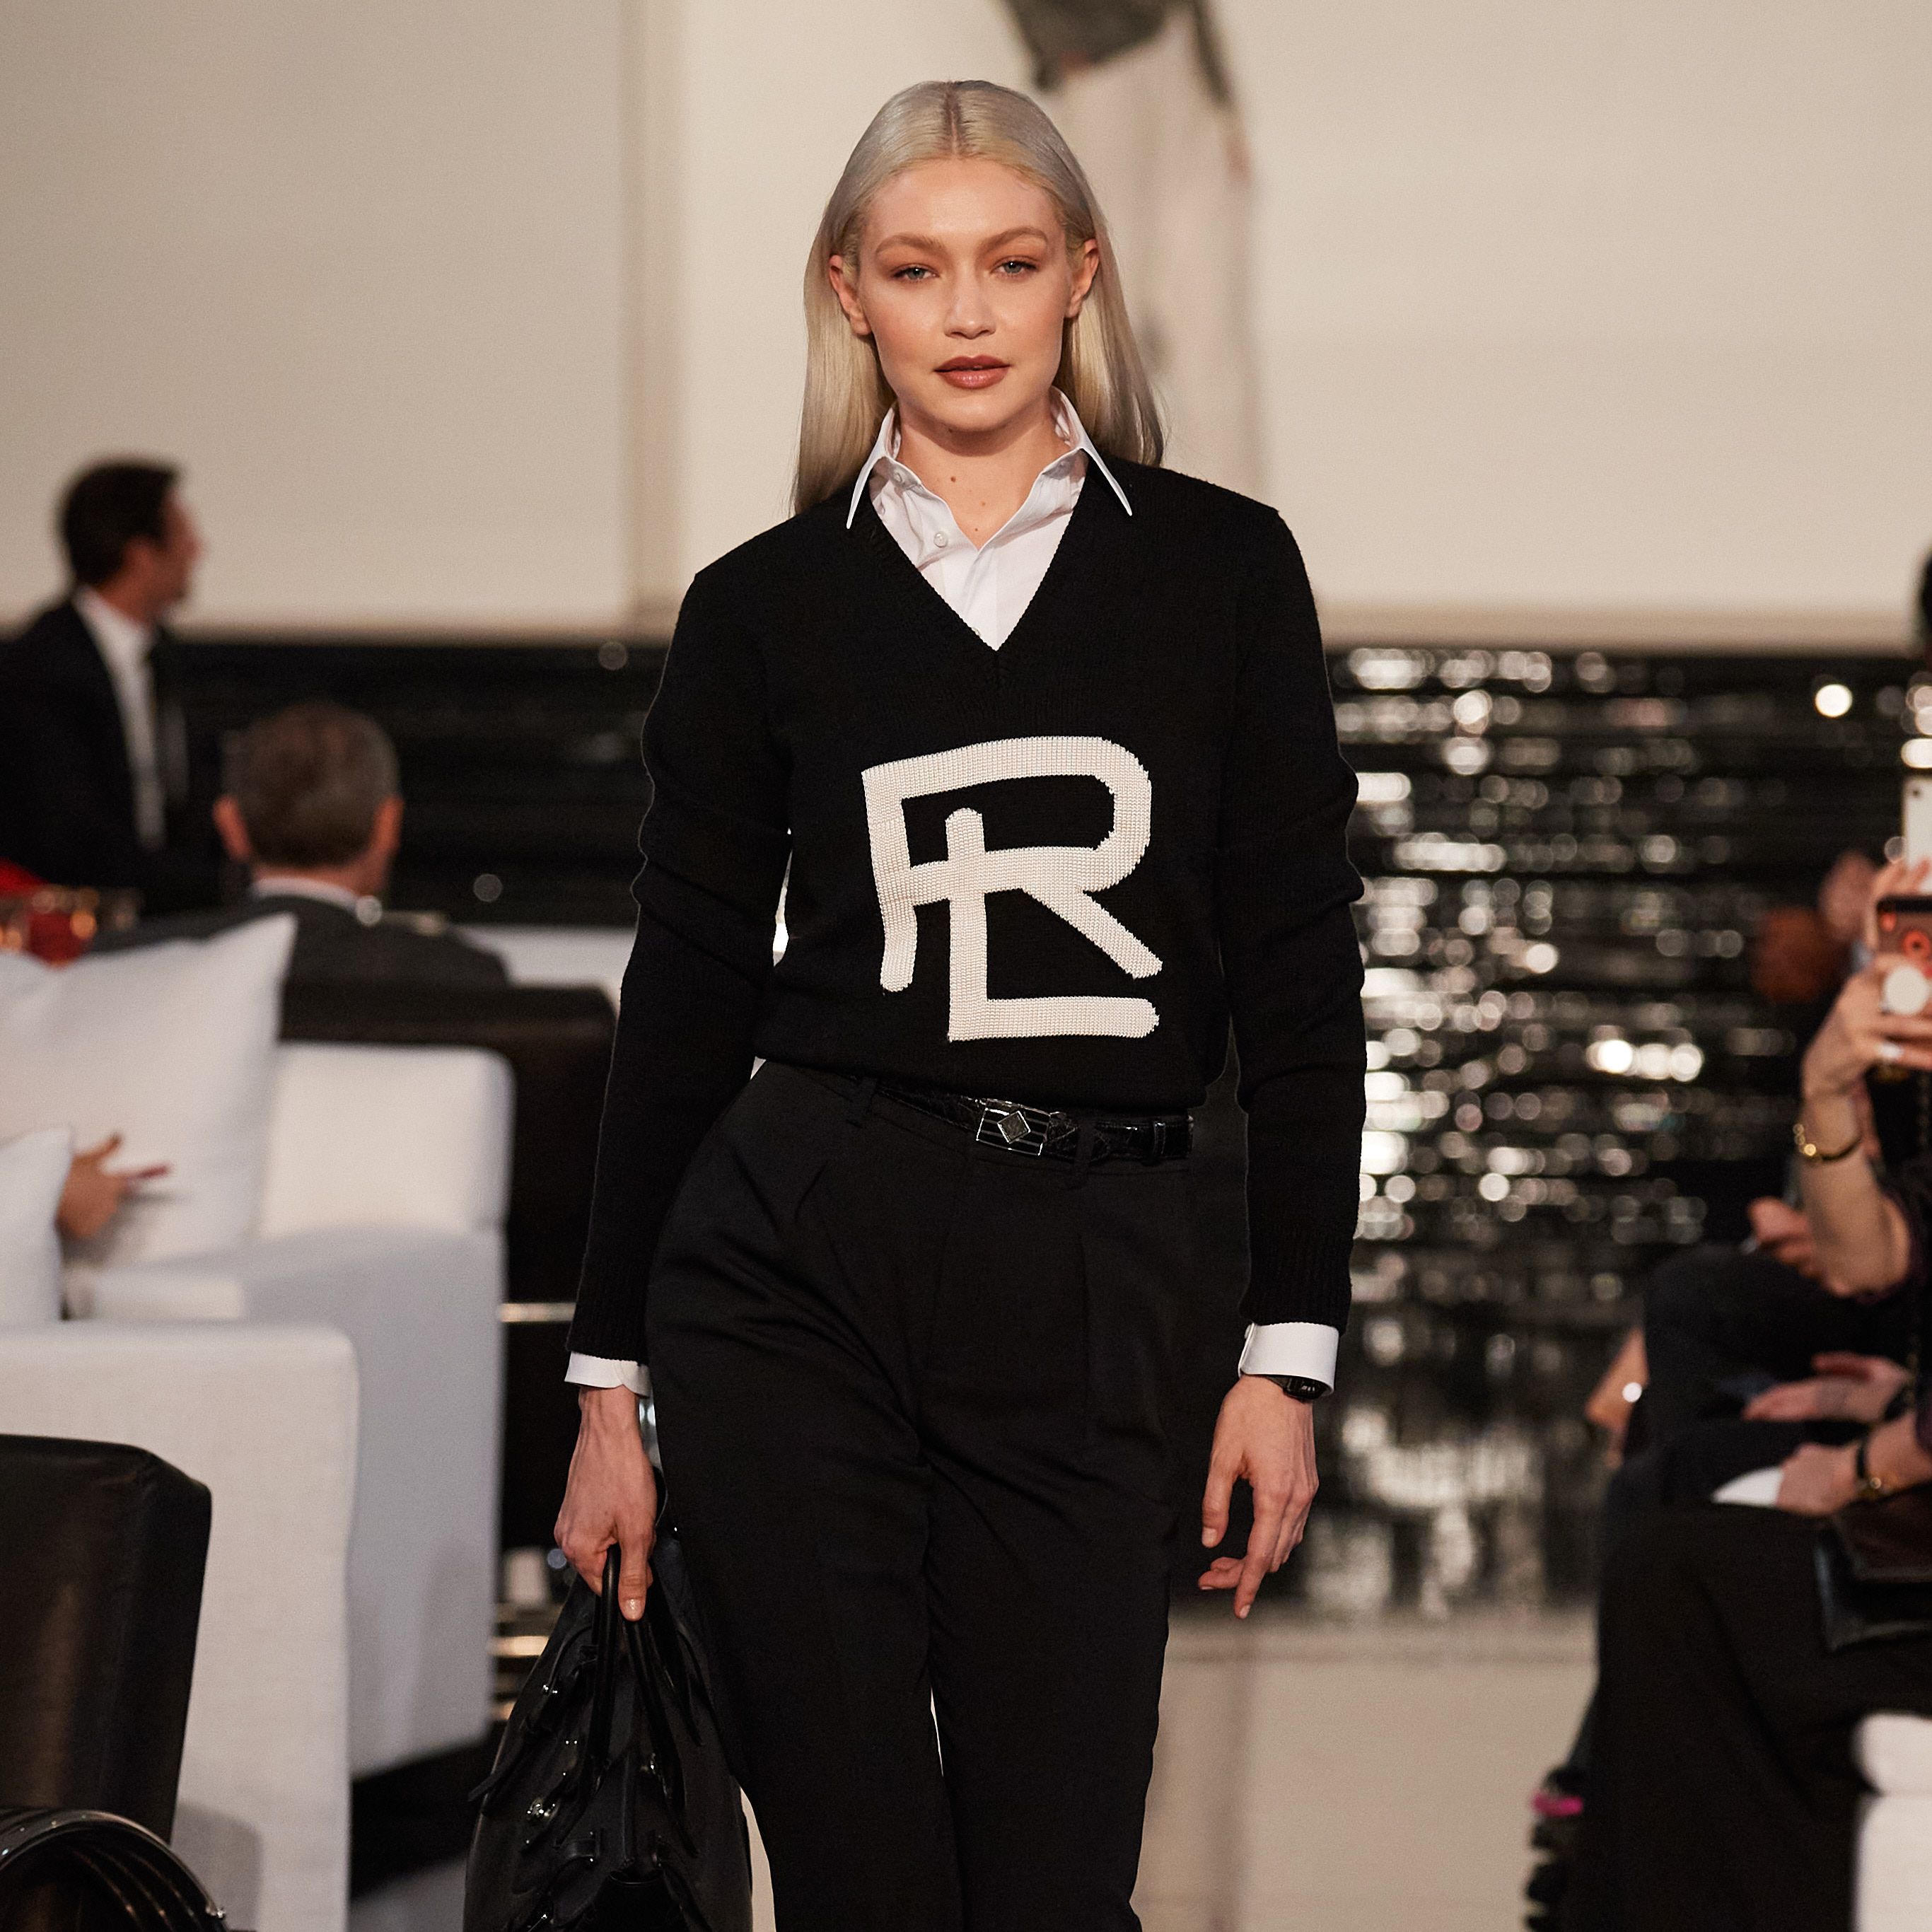 The brand returned to IRL shows for the first time in over two years with a sleek, seductive collection.